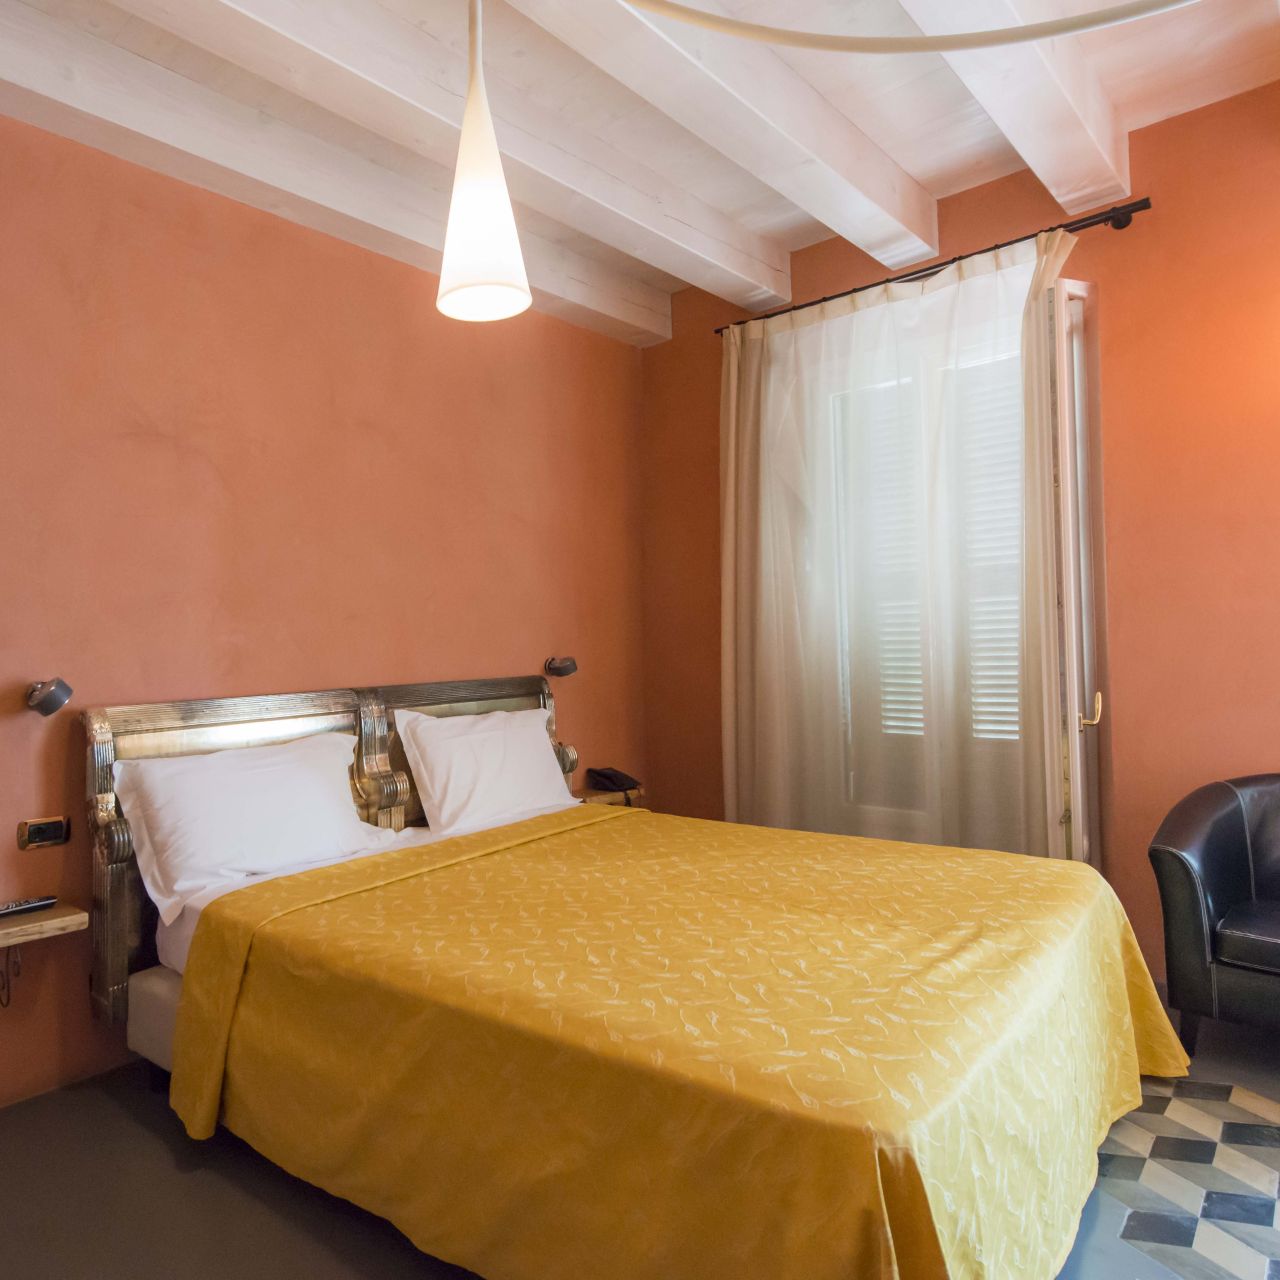 Hotel Remat - Garda - Great prices at HOTEL INFO